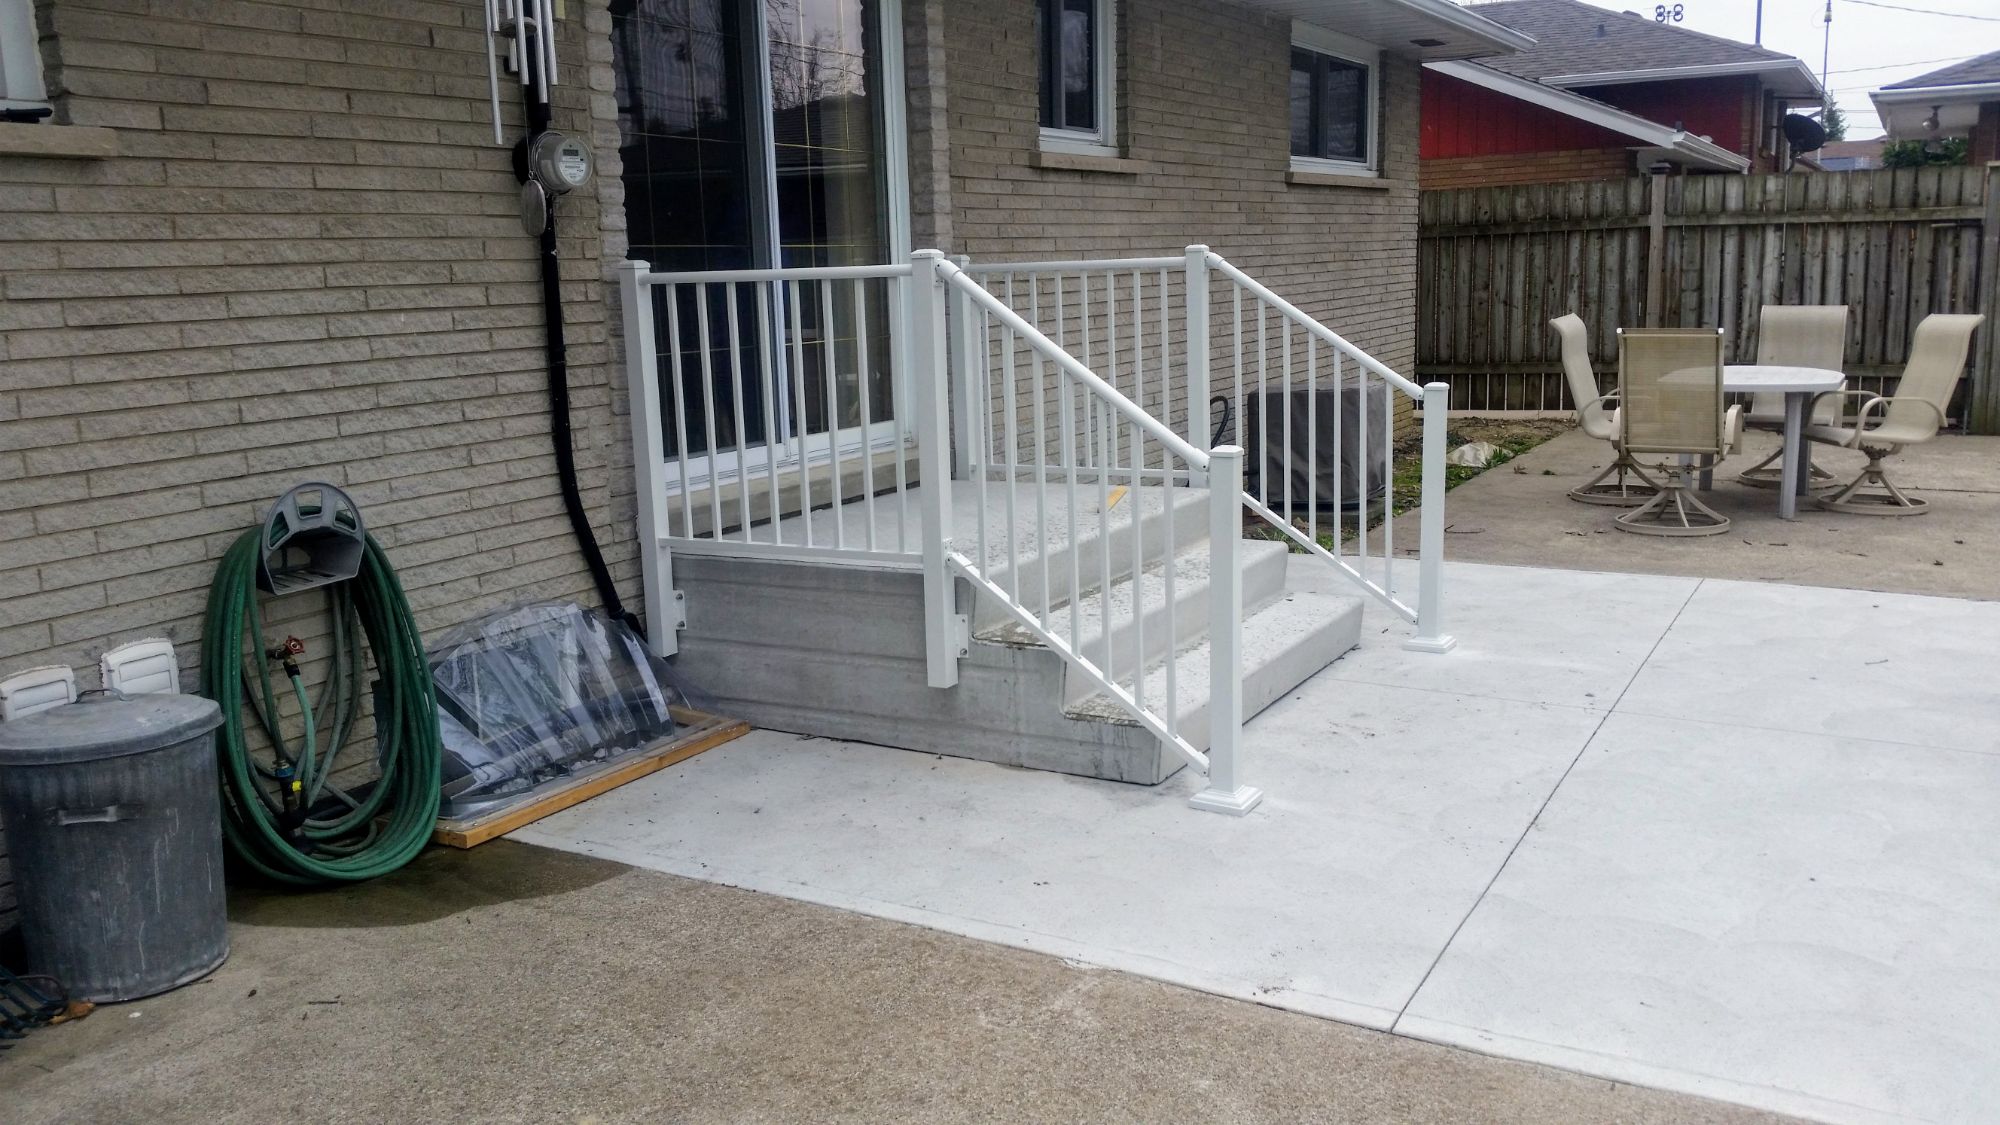 Back in 2018, we did this porch rail for a customer in central Windsor. Side-mounted to a precast concrete steps - it is secure while maintaining maximum walking room. Powder-coated white, this porch railing will last this customer for years to come.